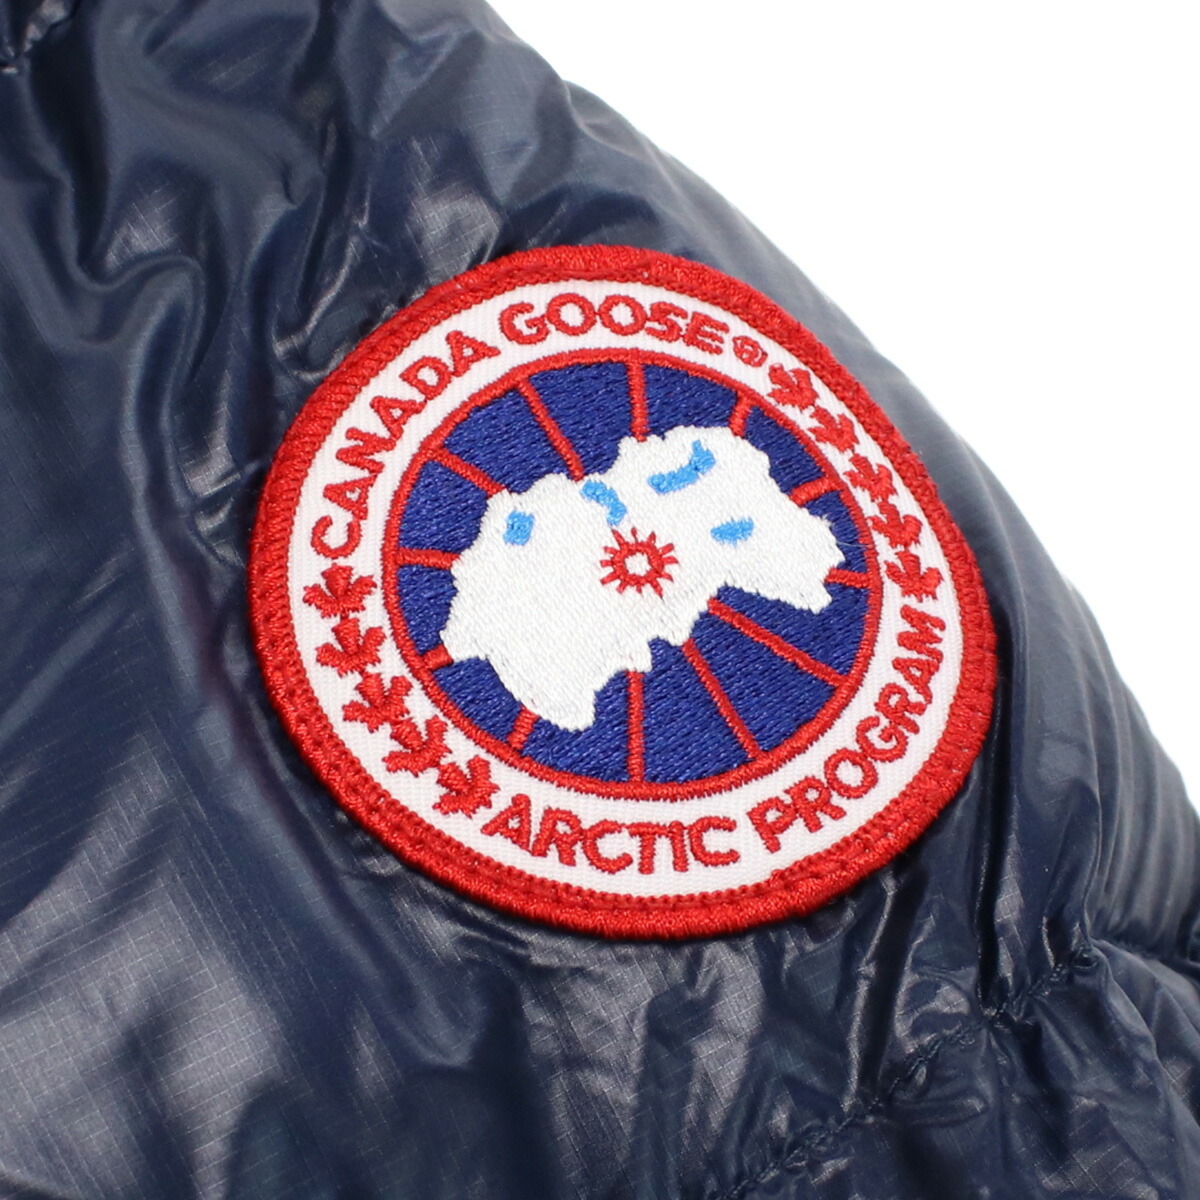 Armerie Boutique / カナダグース CANADA GOOSE CYPRESS PUFFER